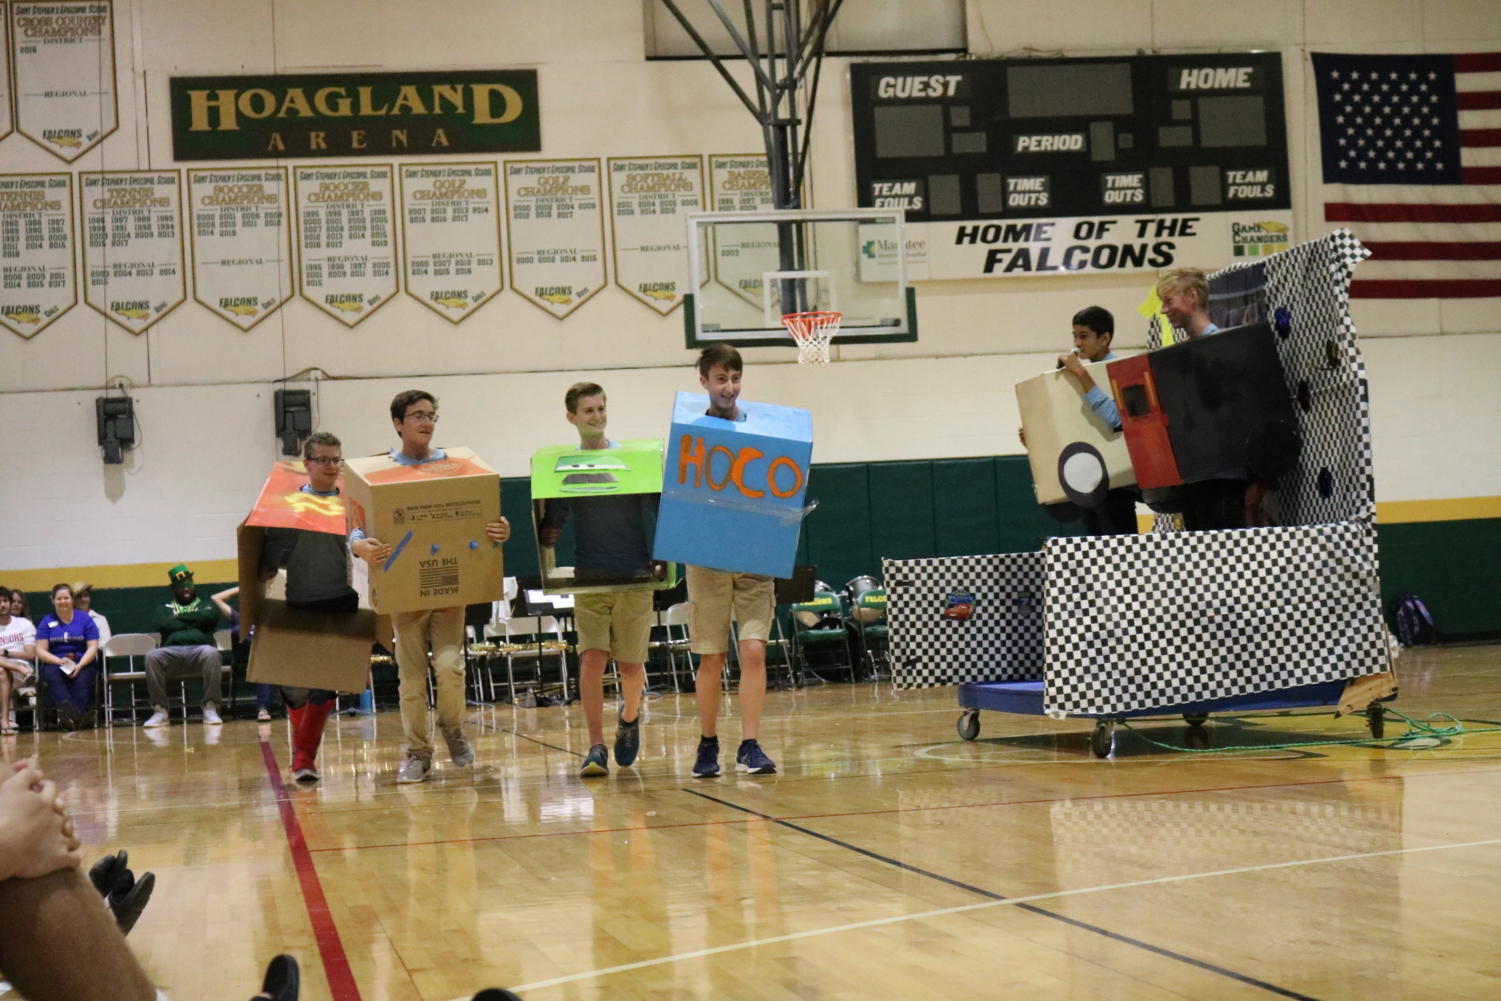 Spirit+week+day+5+photo+gallery%3A+Float+and+Skit